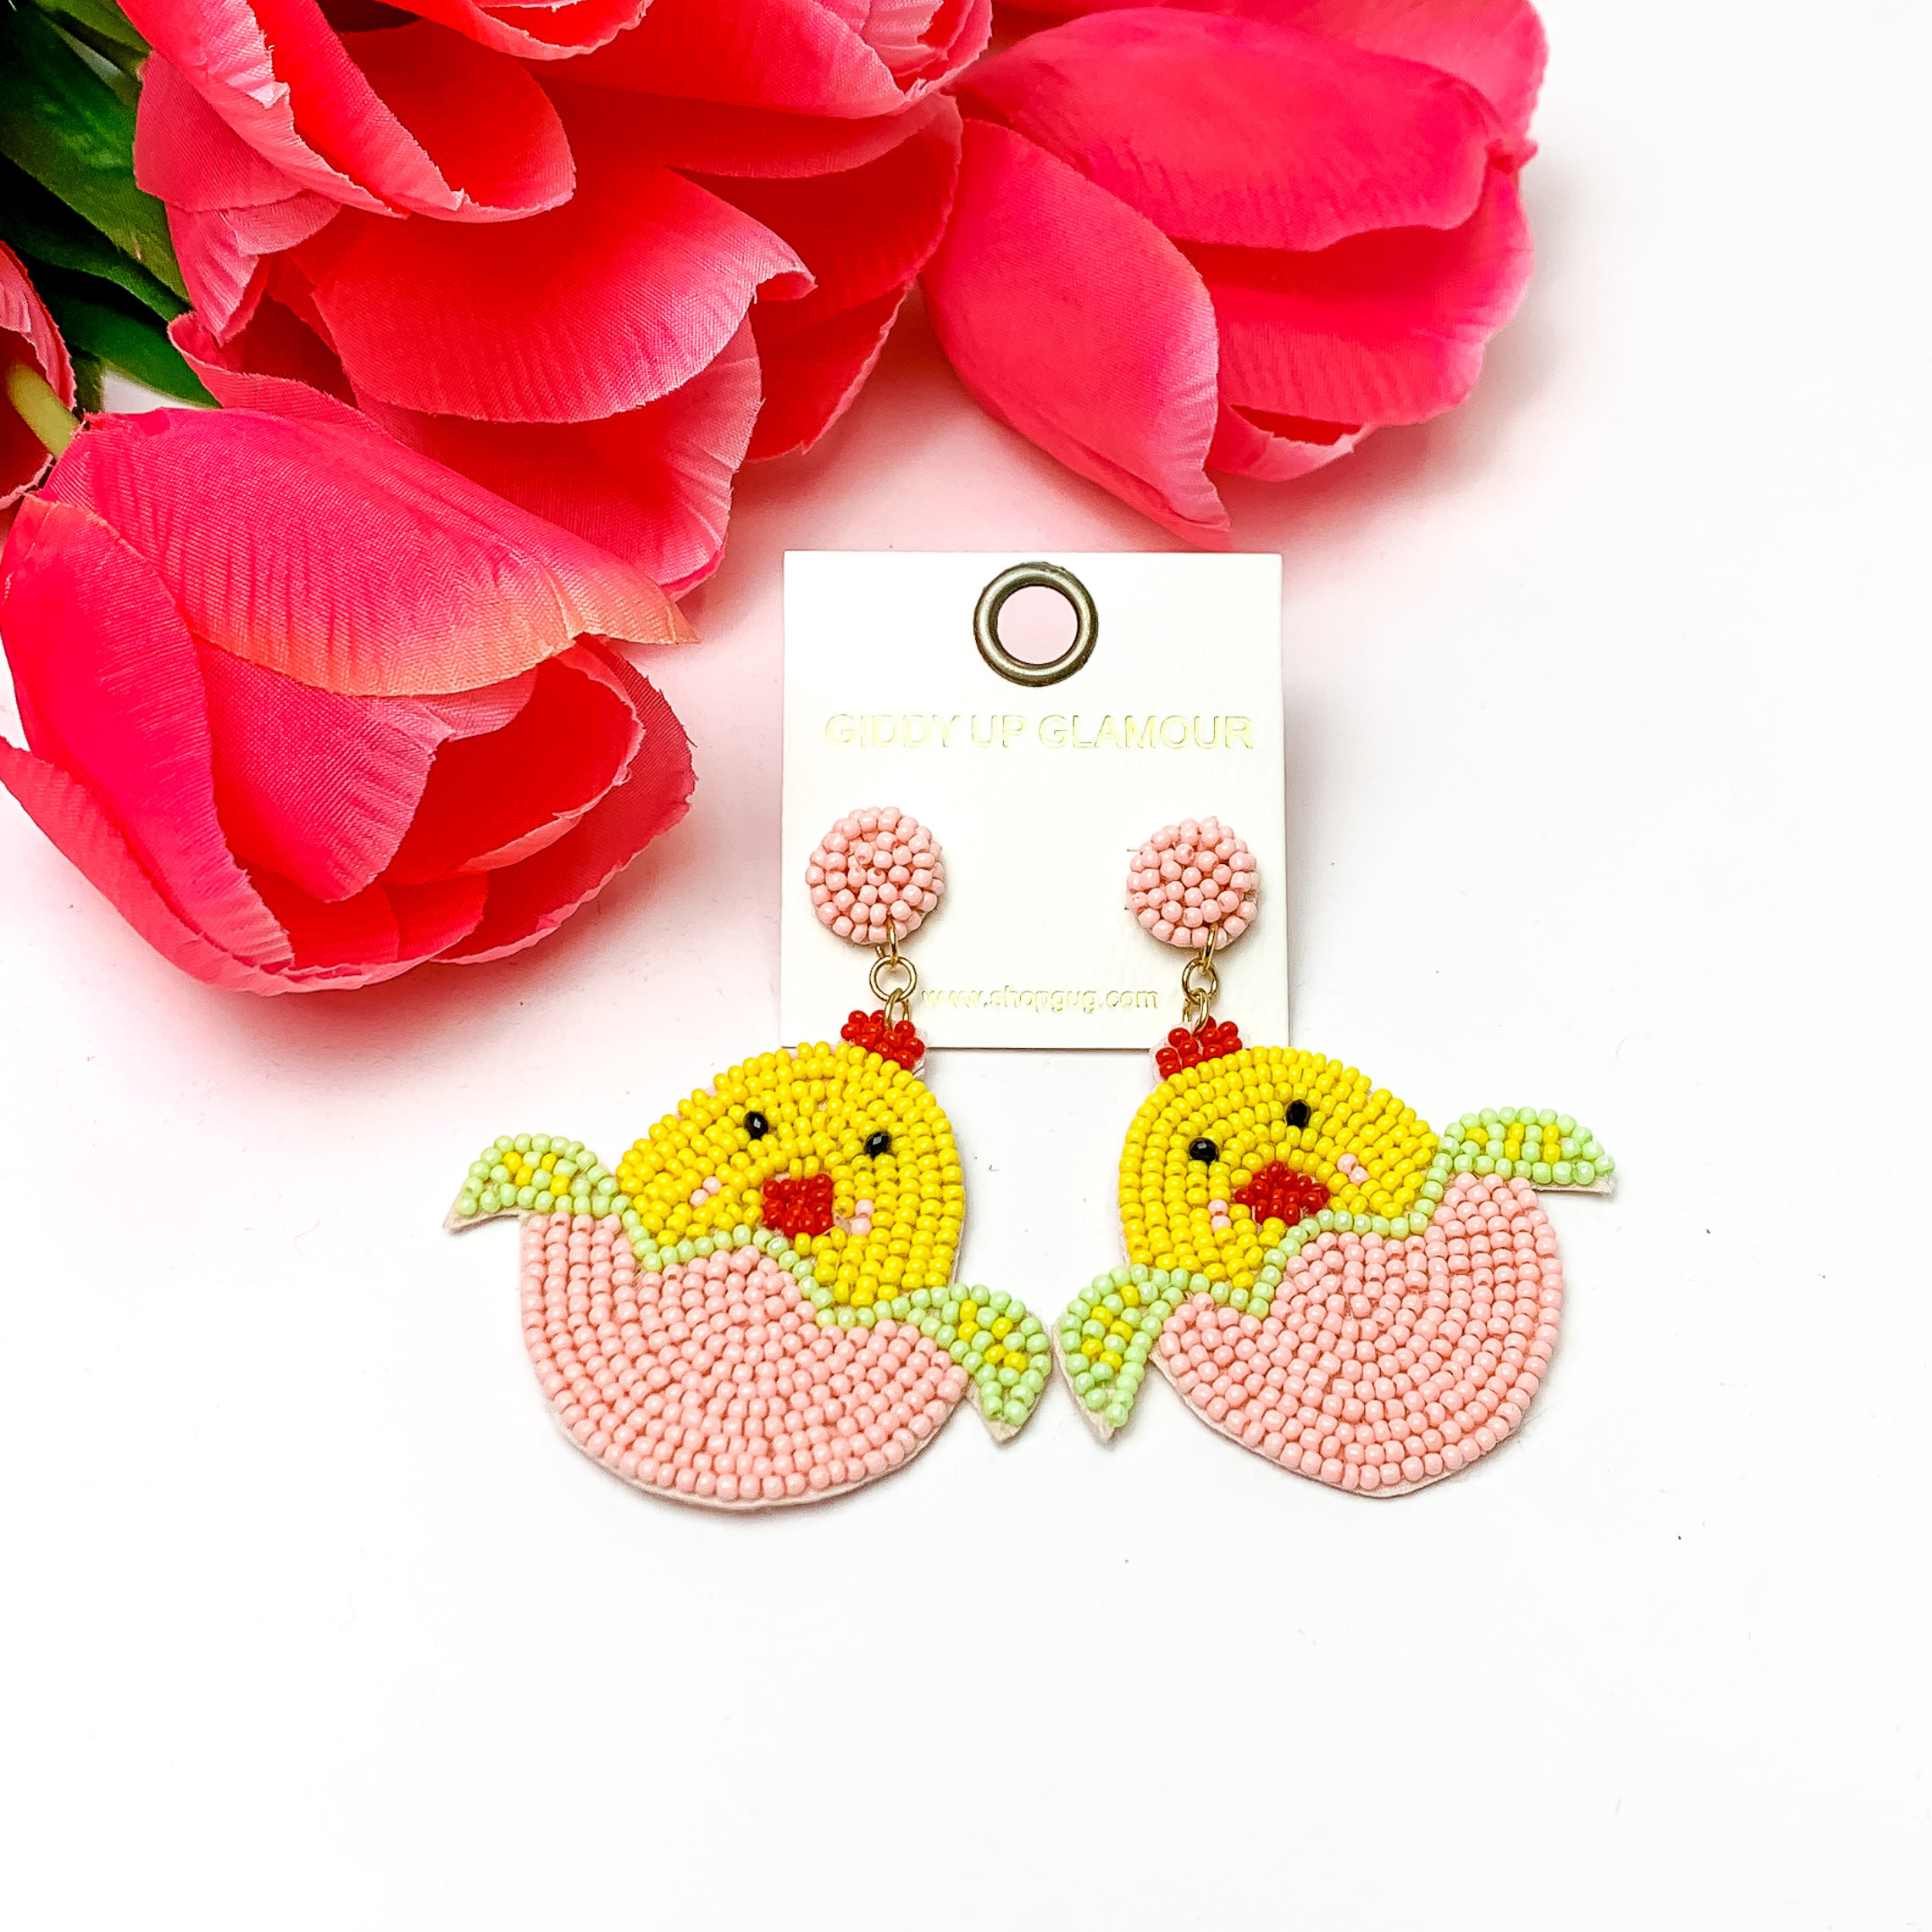 Beaded, light pink Easter egg earrings with a yellow beaded chick hatching. Pictured on white background with red-coral colored flowers.